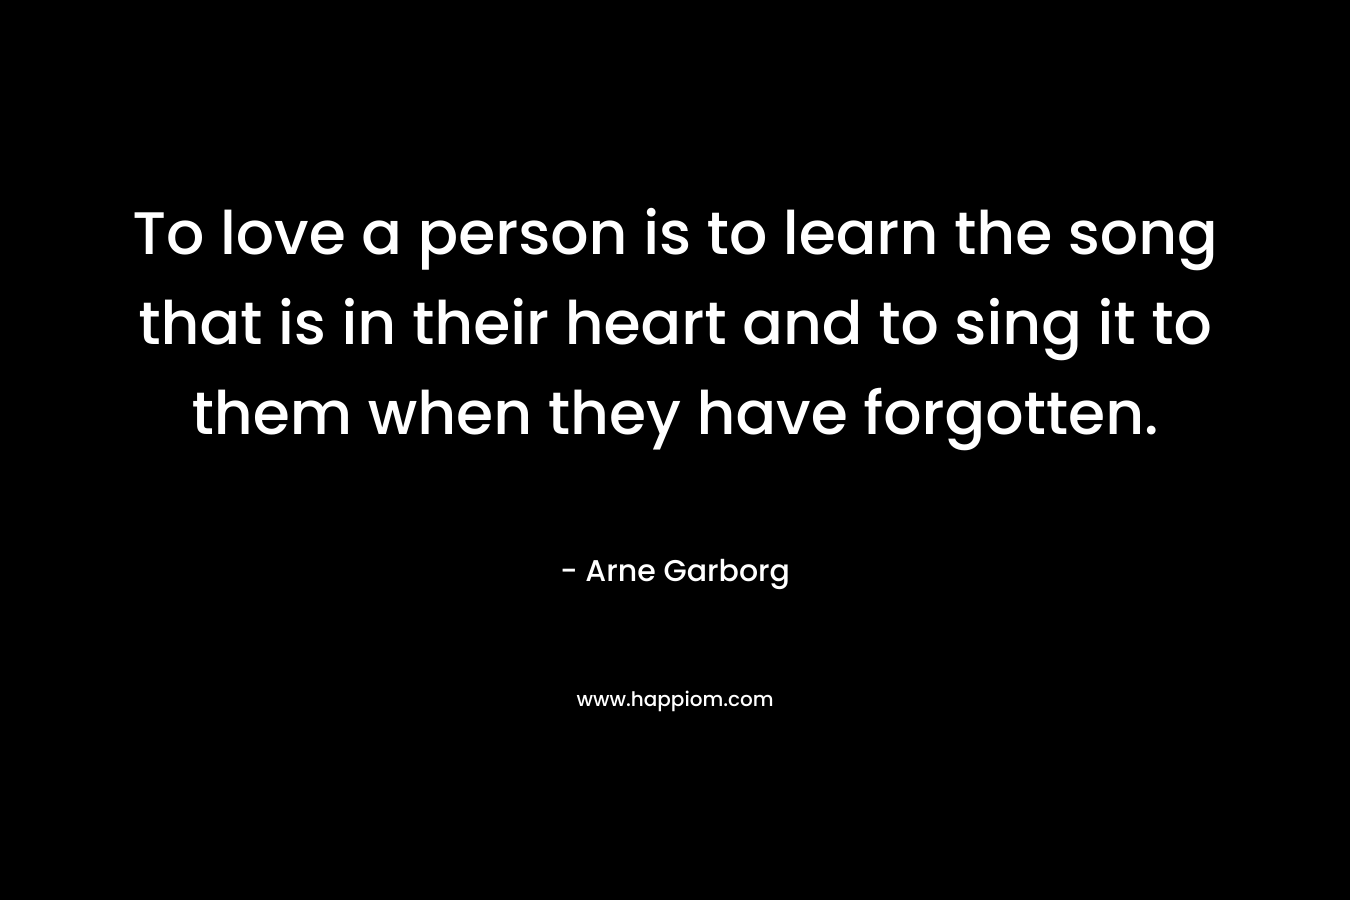 To love a person is to learn the song that is in their heart and to sing it to them when they have forgotten.